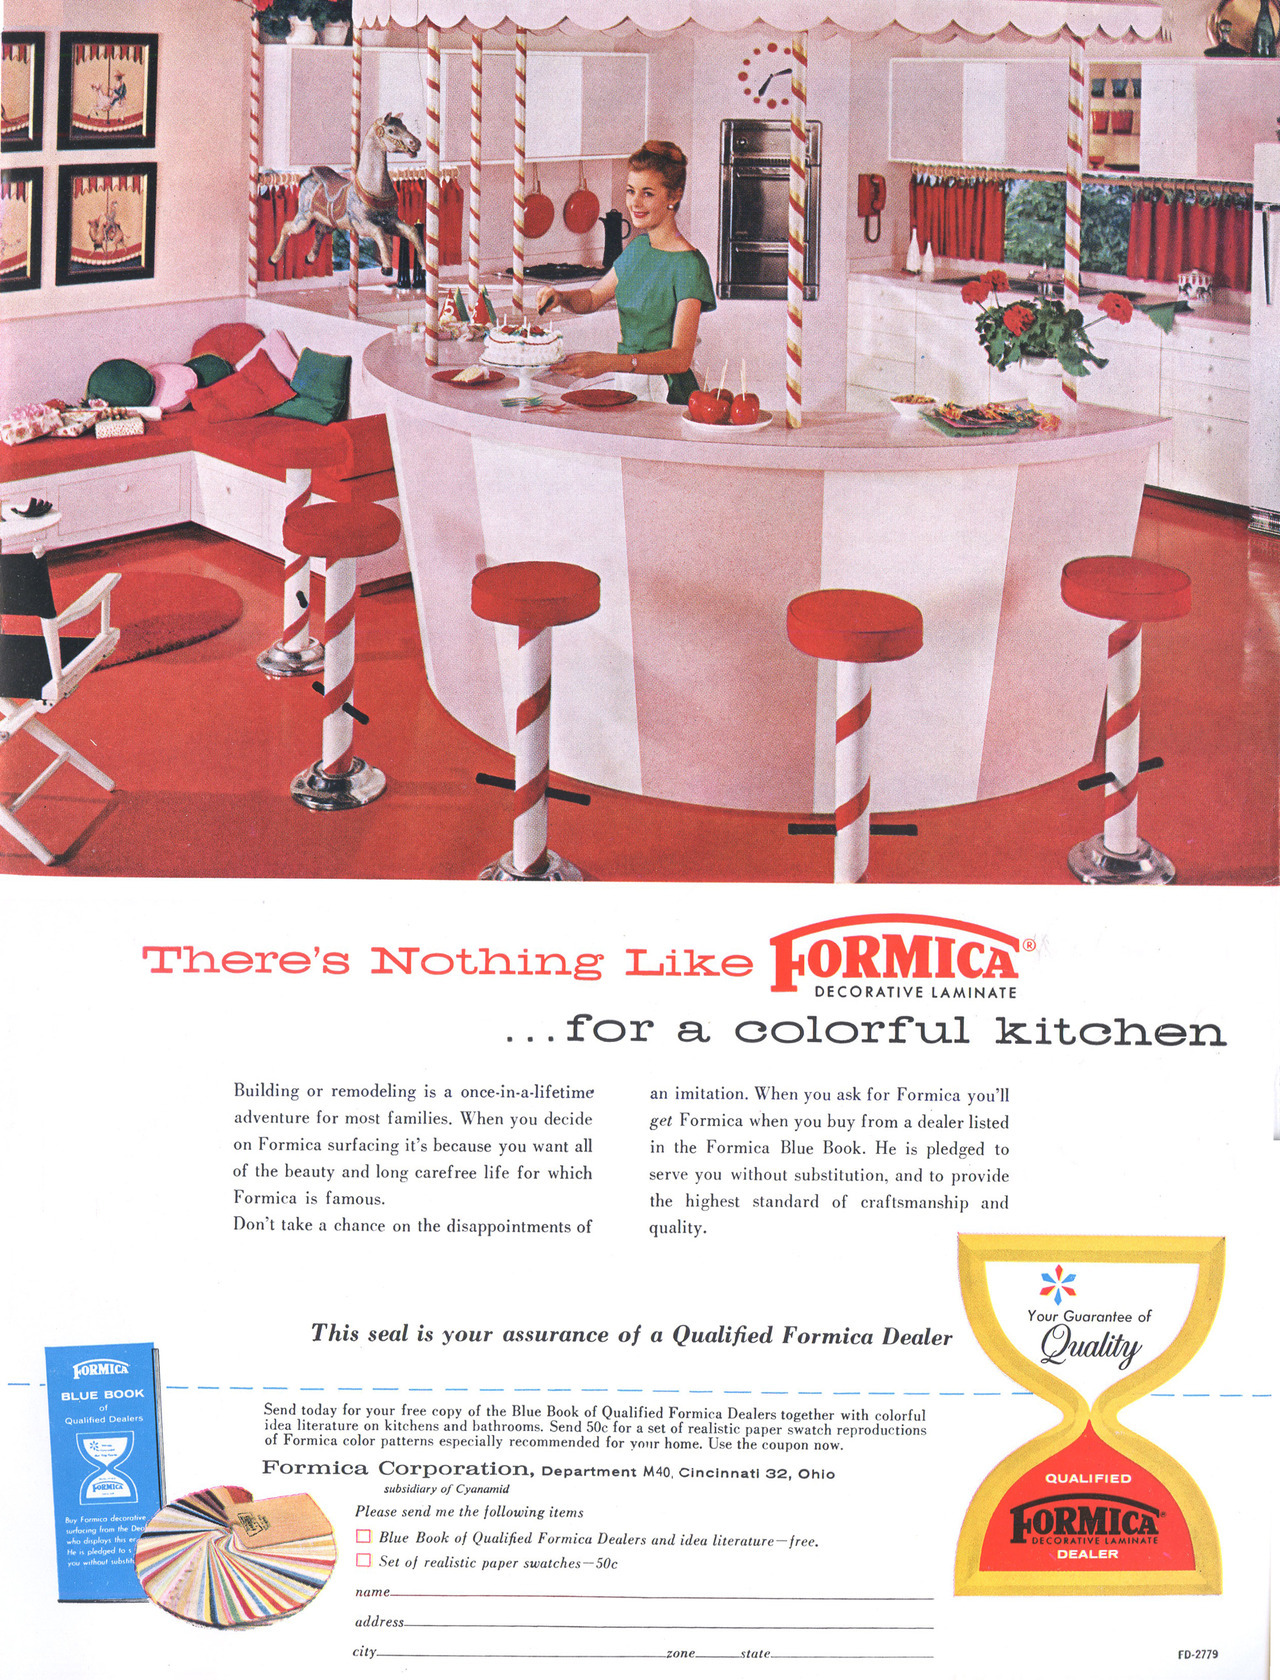 Formica Corporation - published in House Beautiful’s Building Manual - Fall-Winter 1961-62